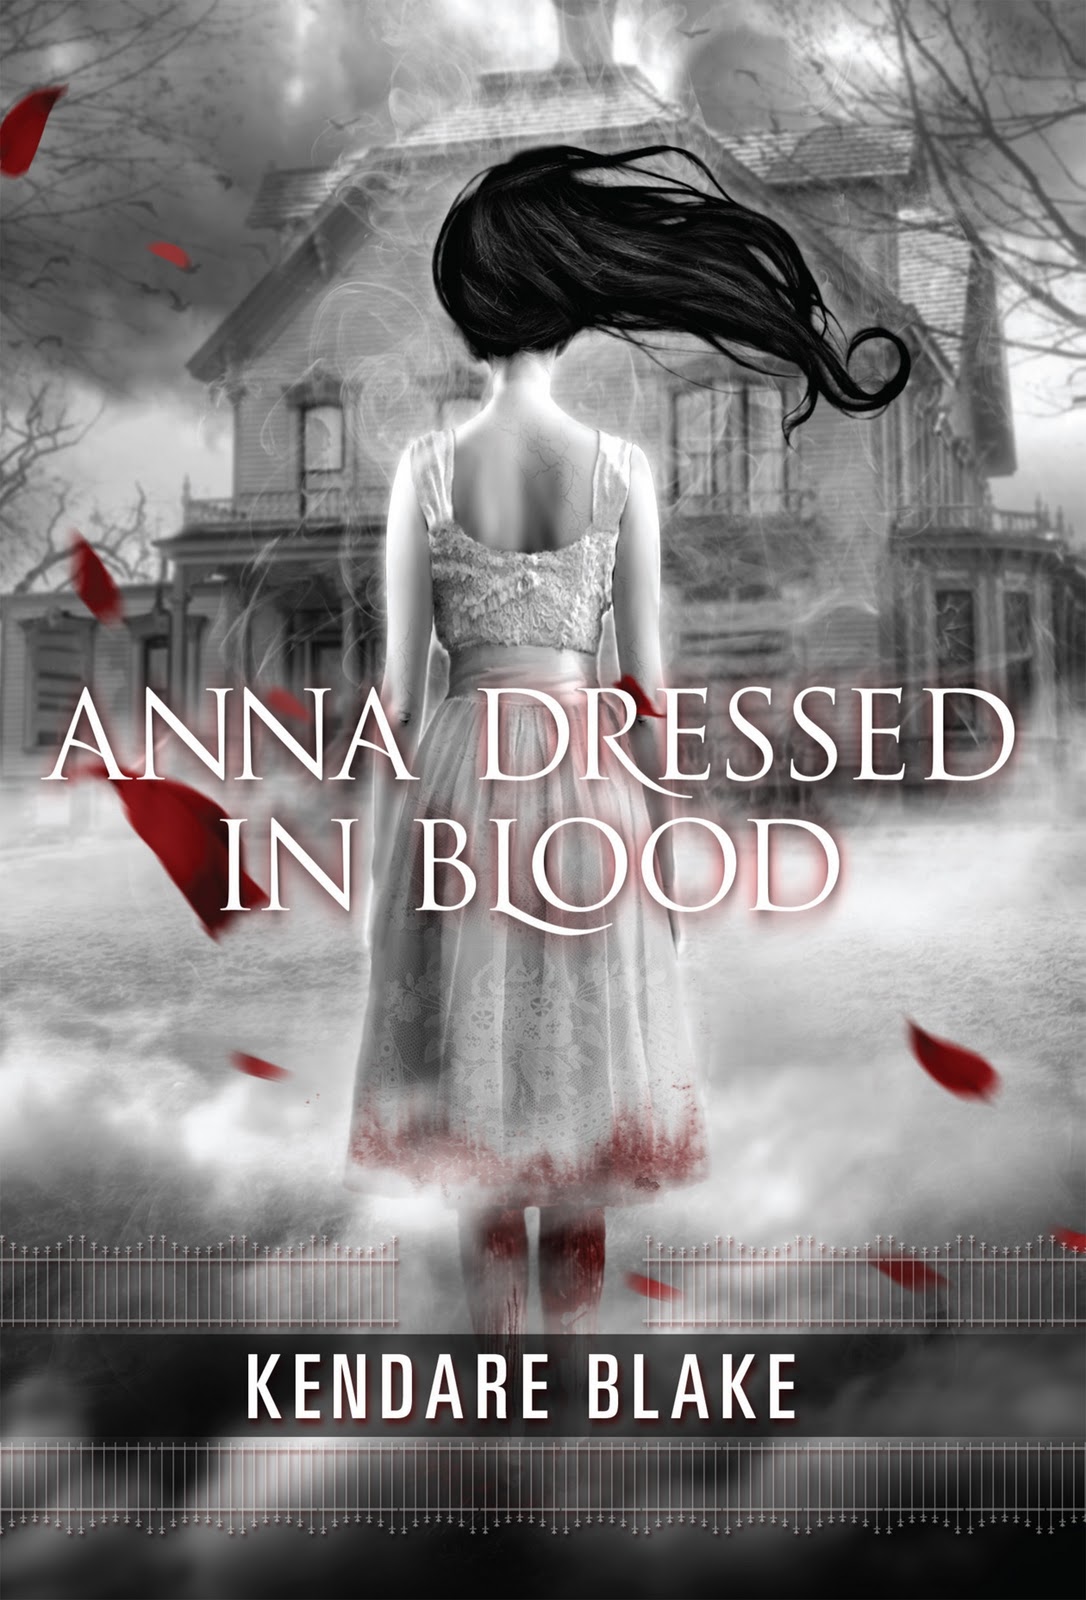 Anna-dressed-in-blood-cover.jpg